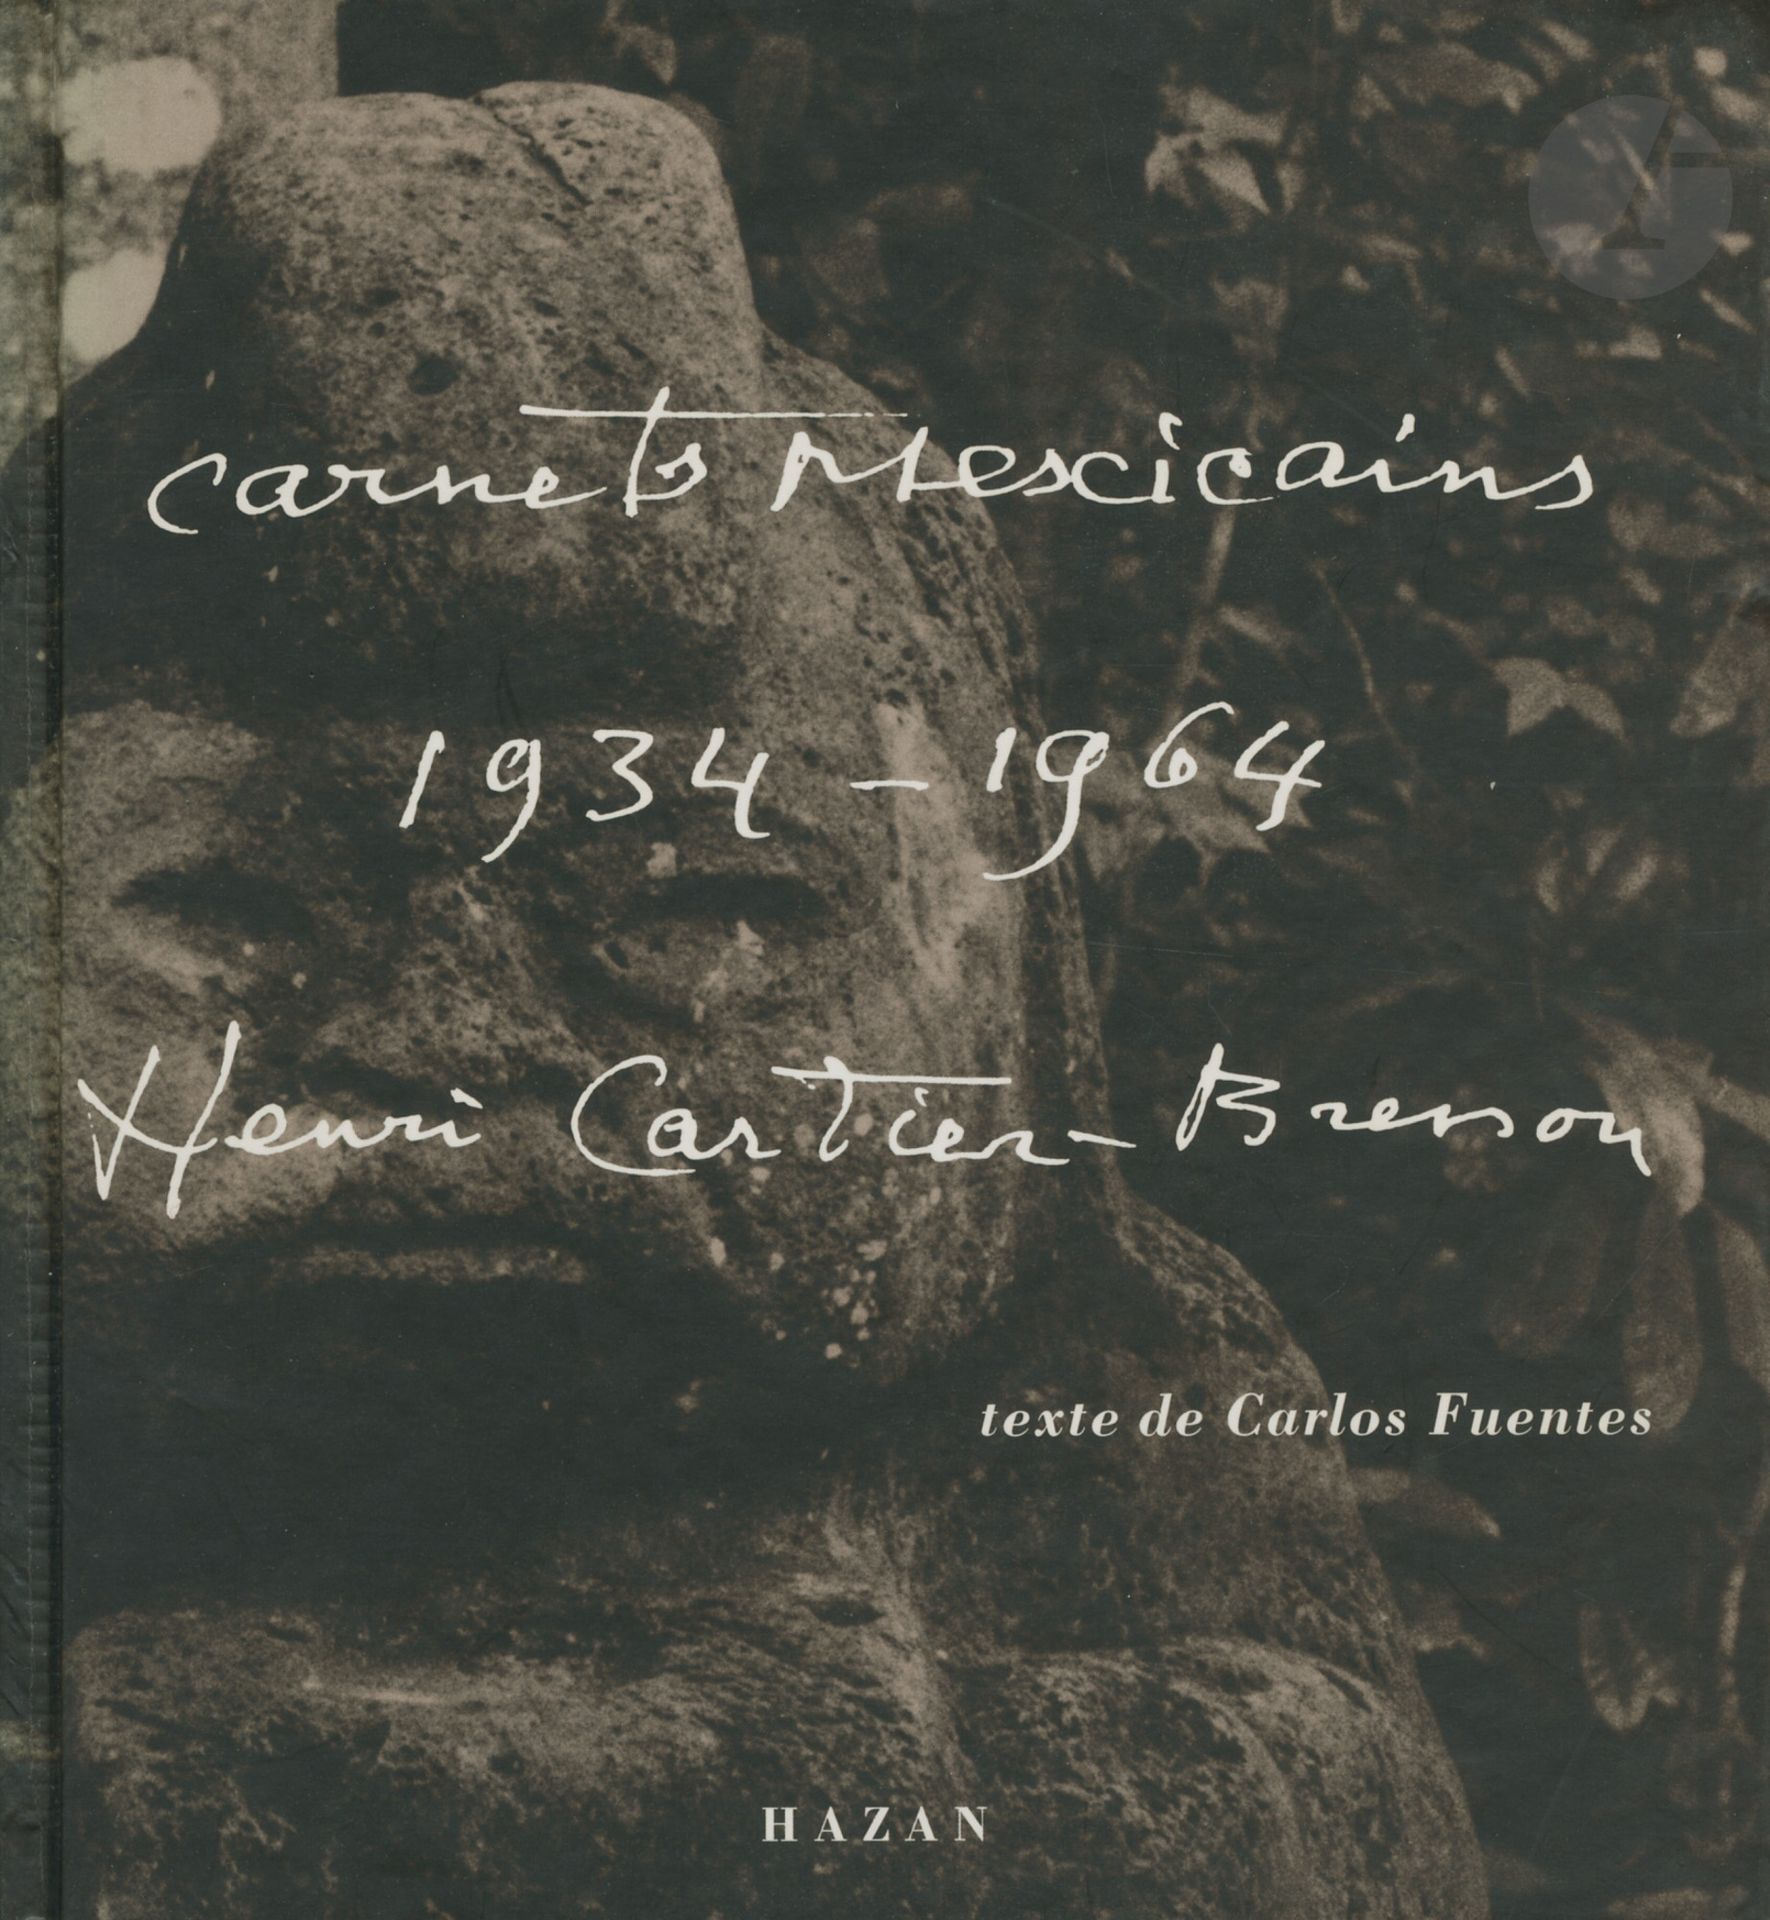 Null CARTIER-BRESSON, HENRI (1908-2004) [Signiert
]Carnets mexicains 1934-1964.
&hellip;